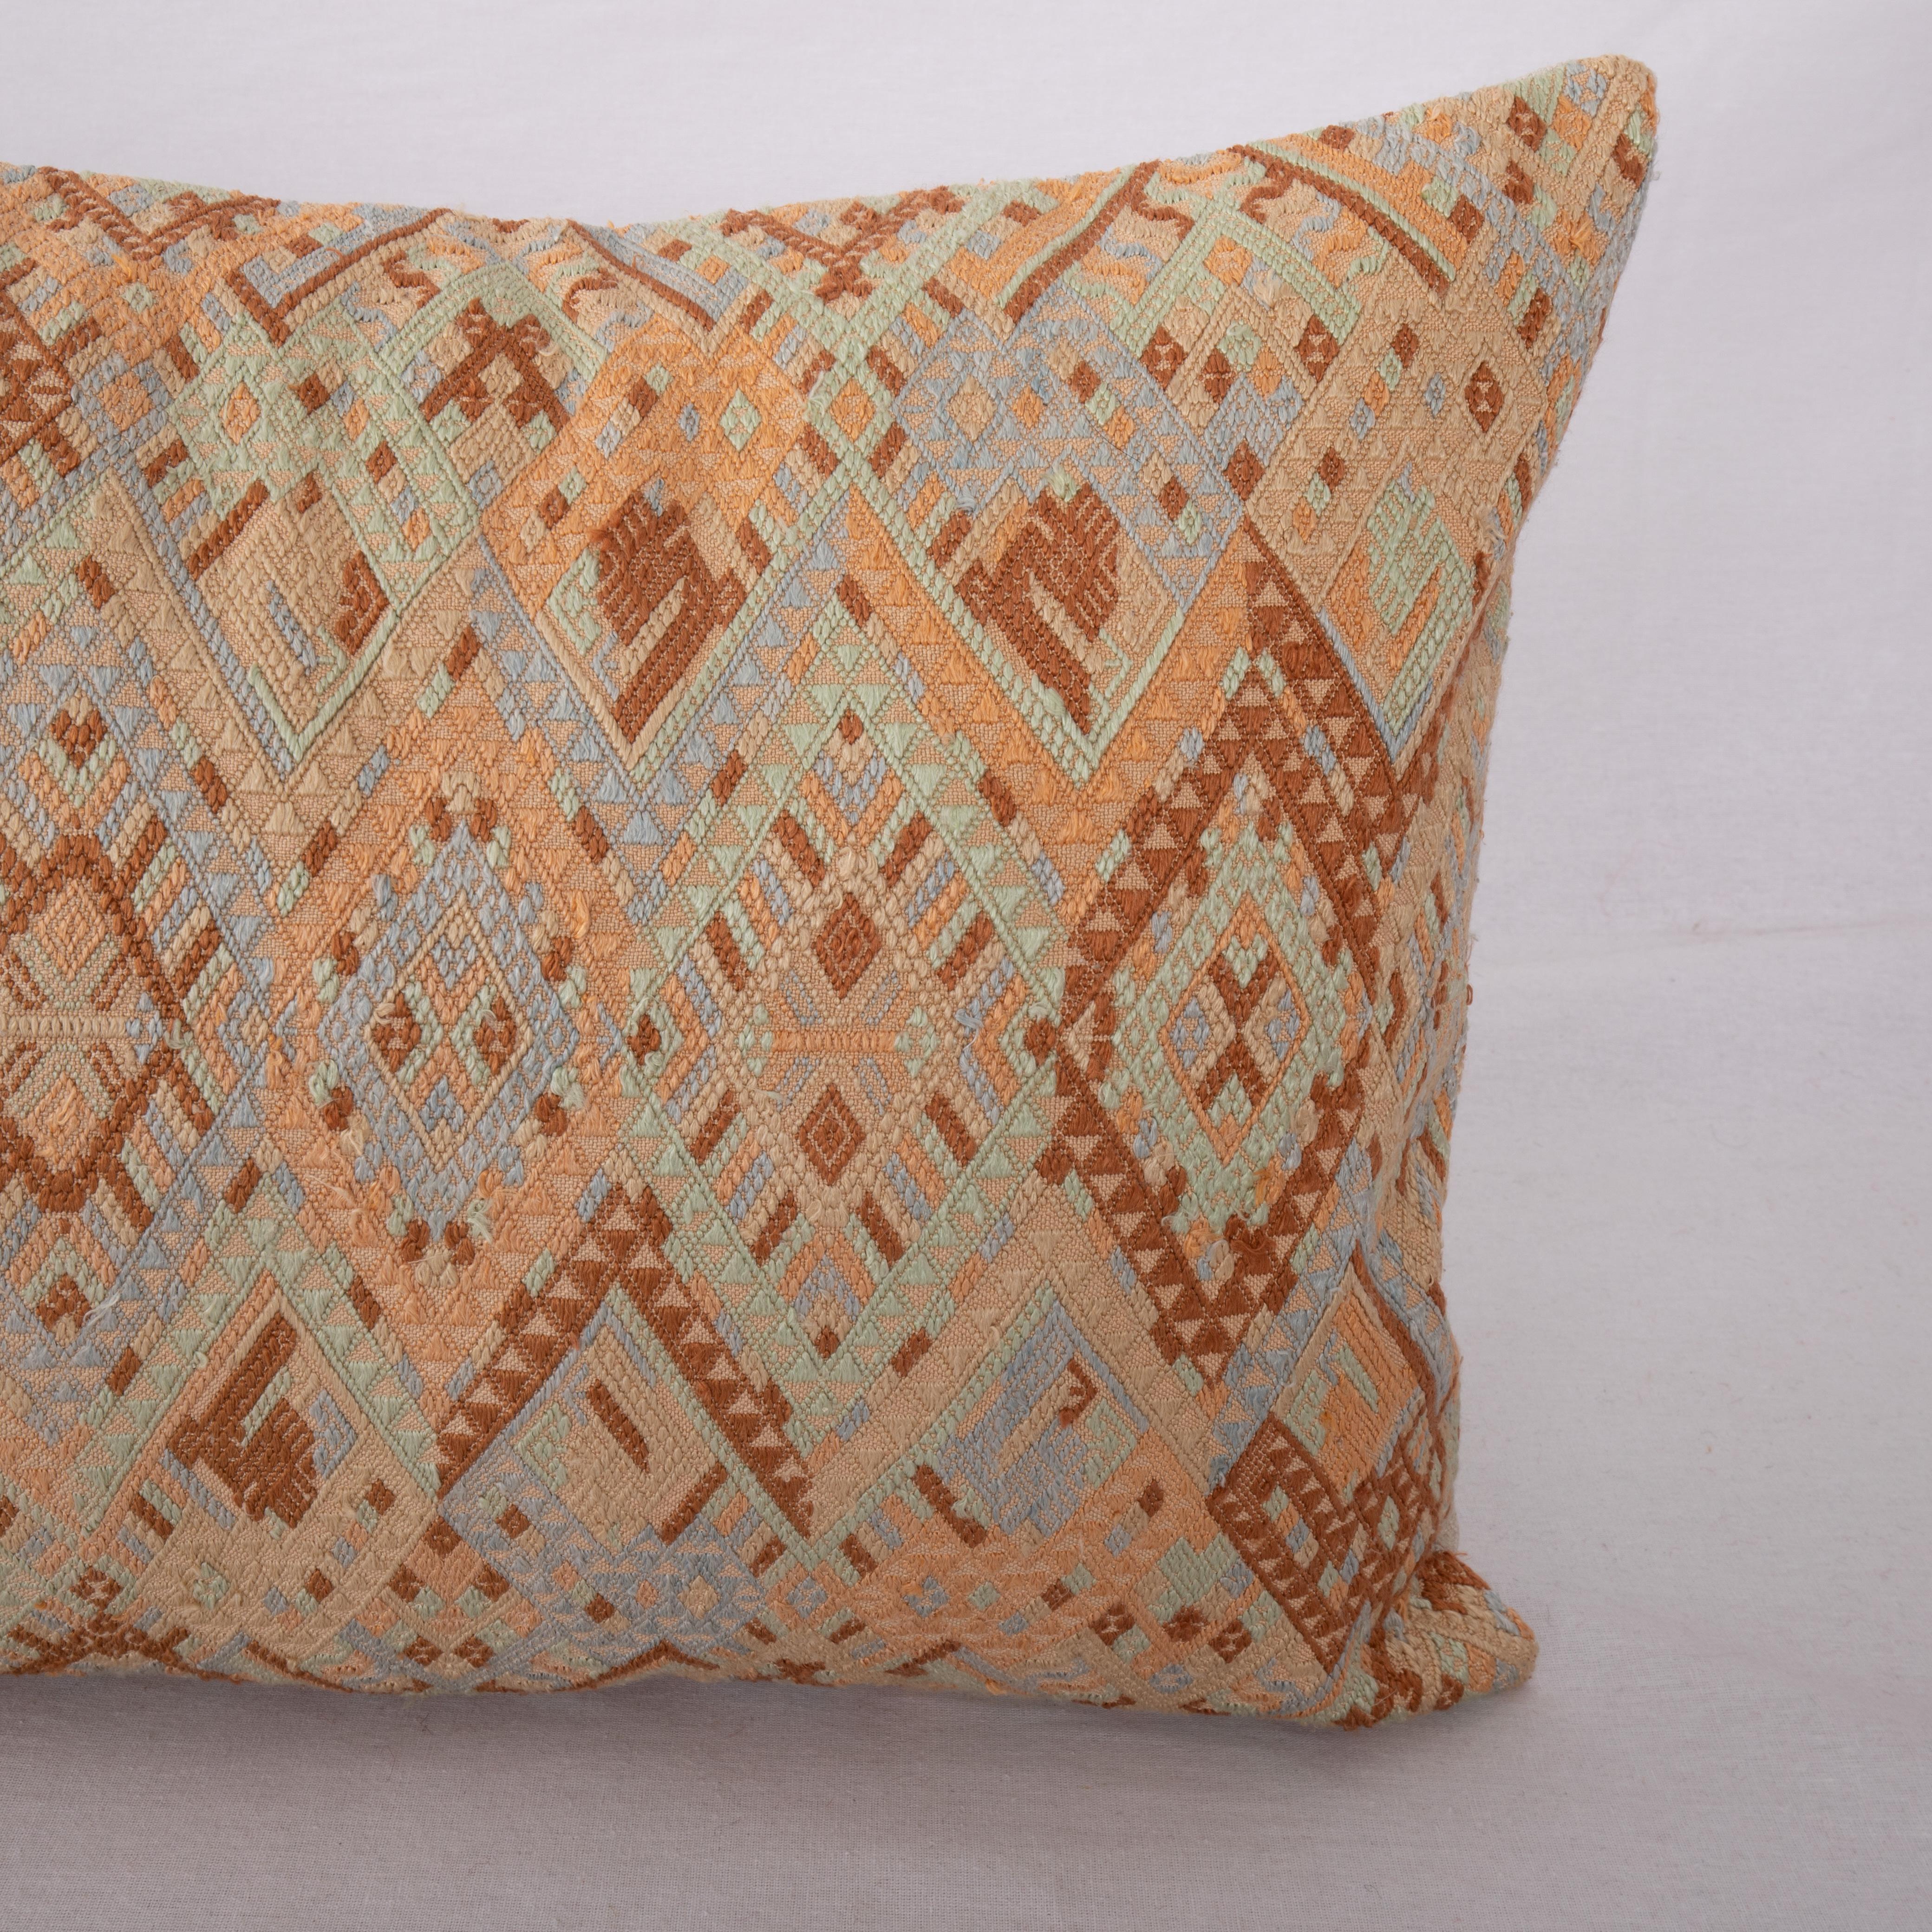 Embroidered Pillow Cover Made from a Laotion Vintage Silk Embroidery For Sale